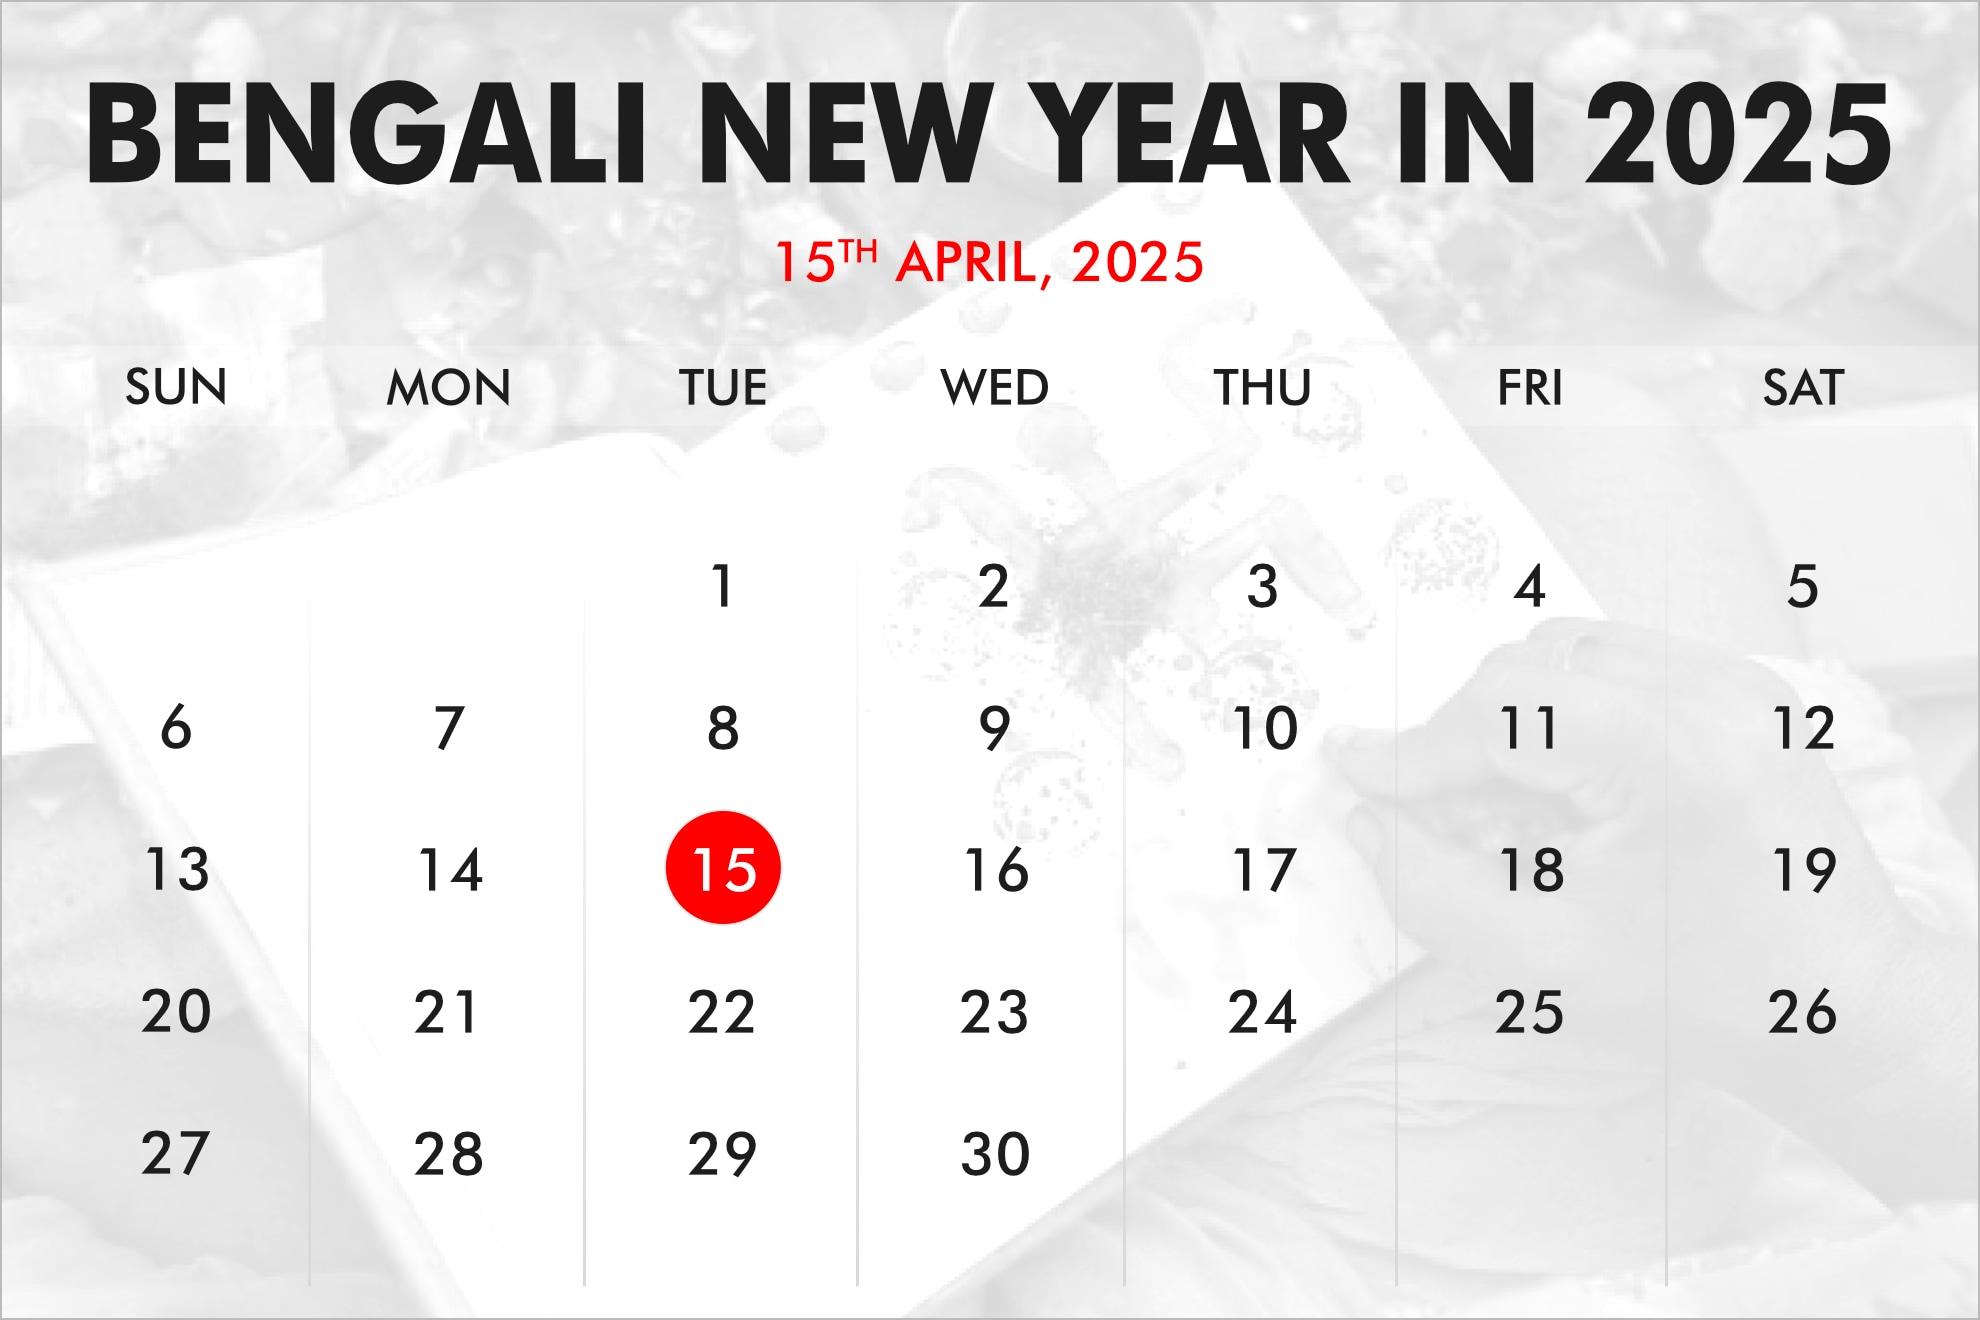 When is Bengali New Year in 2024, 2025, 2026?